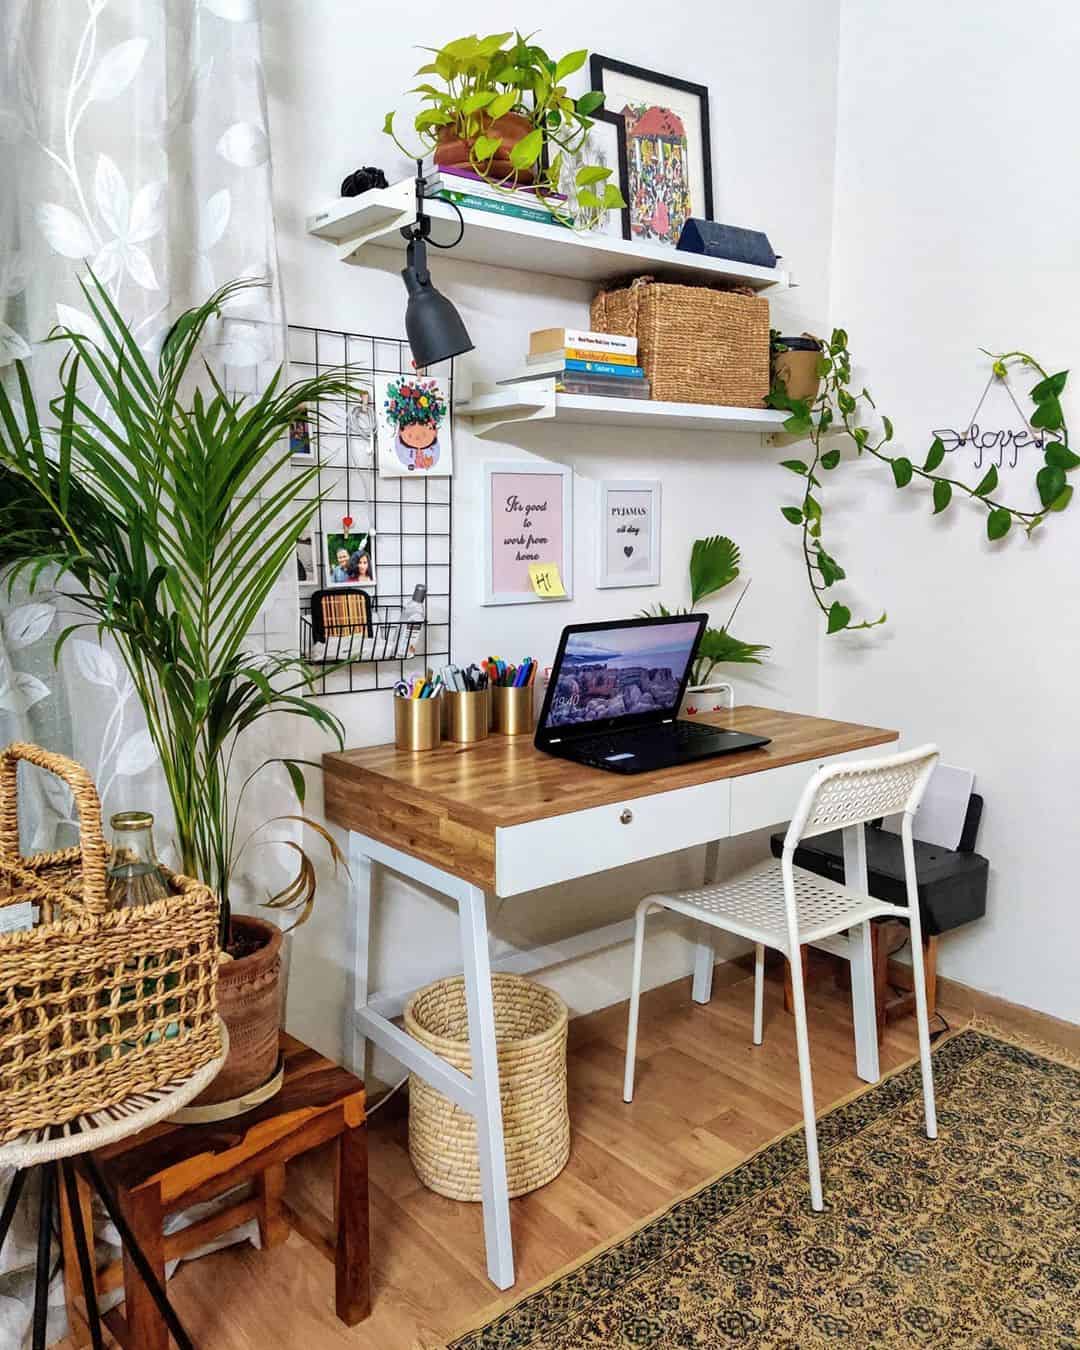 26 Smart and Aesthetic Home Office Design Ideas